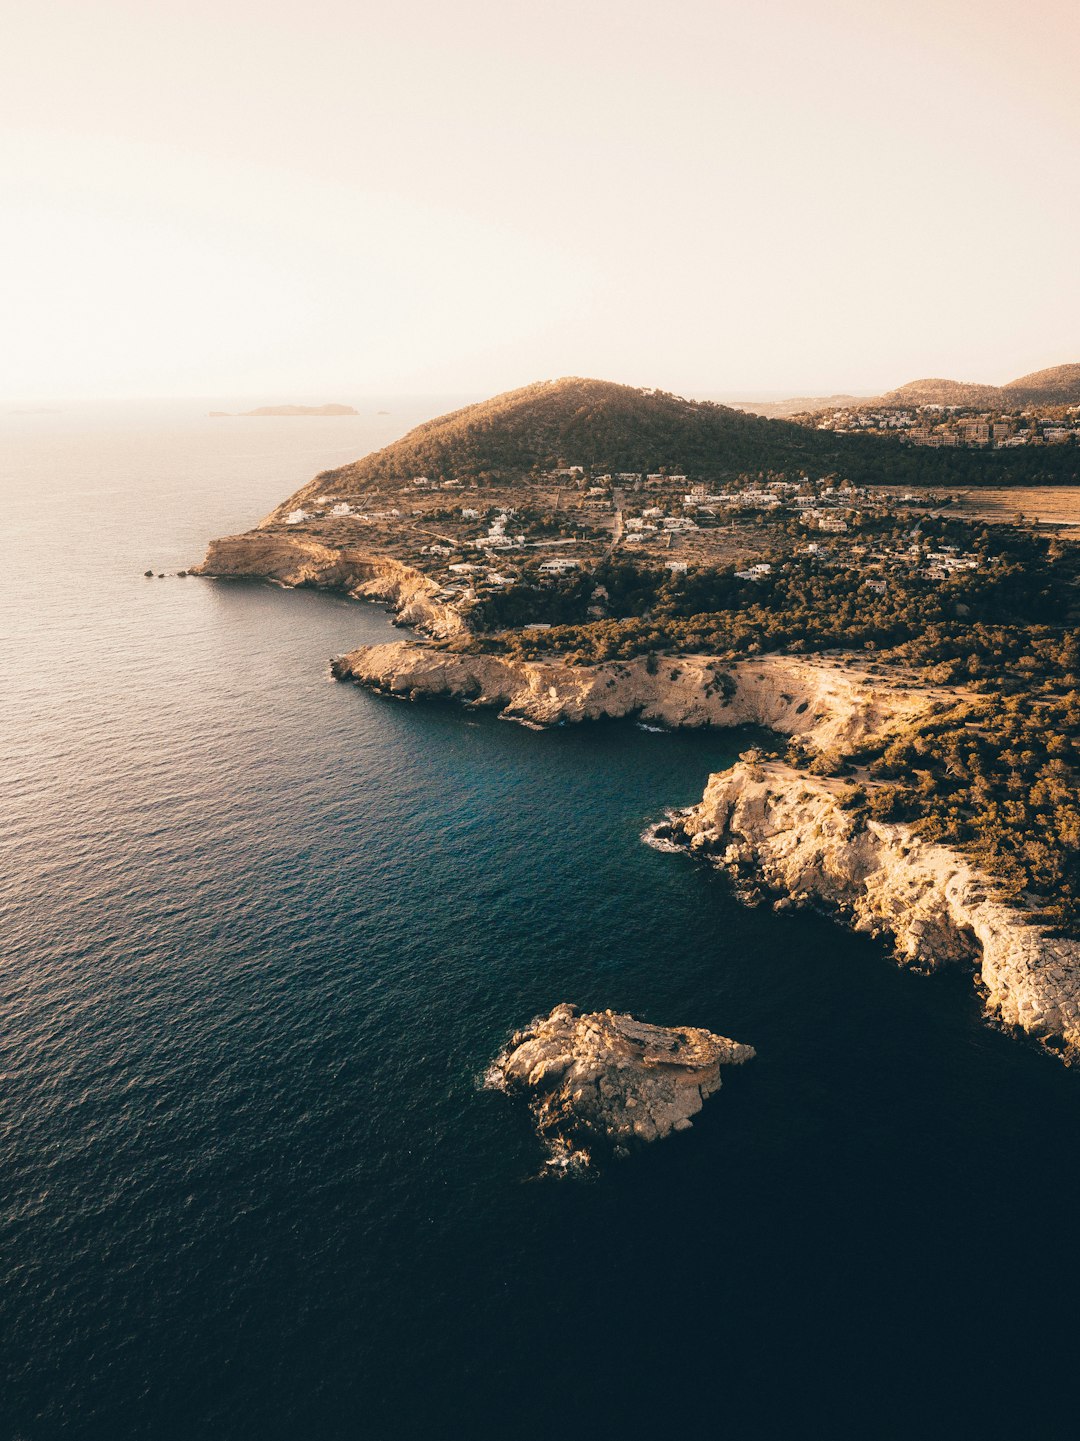 Travel Tips and Stories of Ibiza in Spain